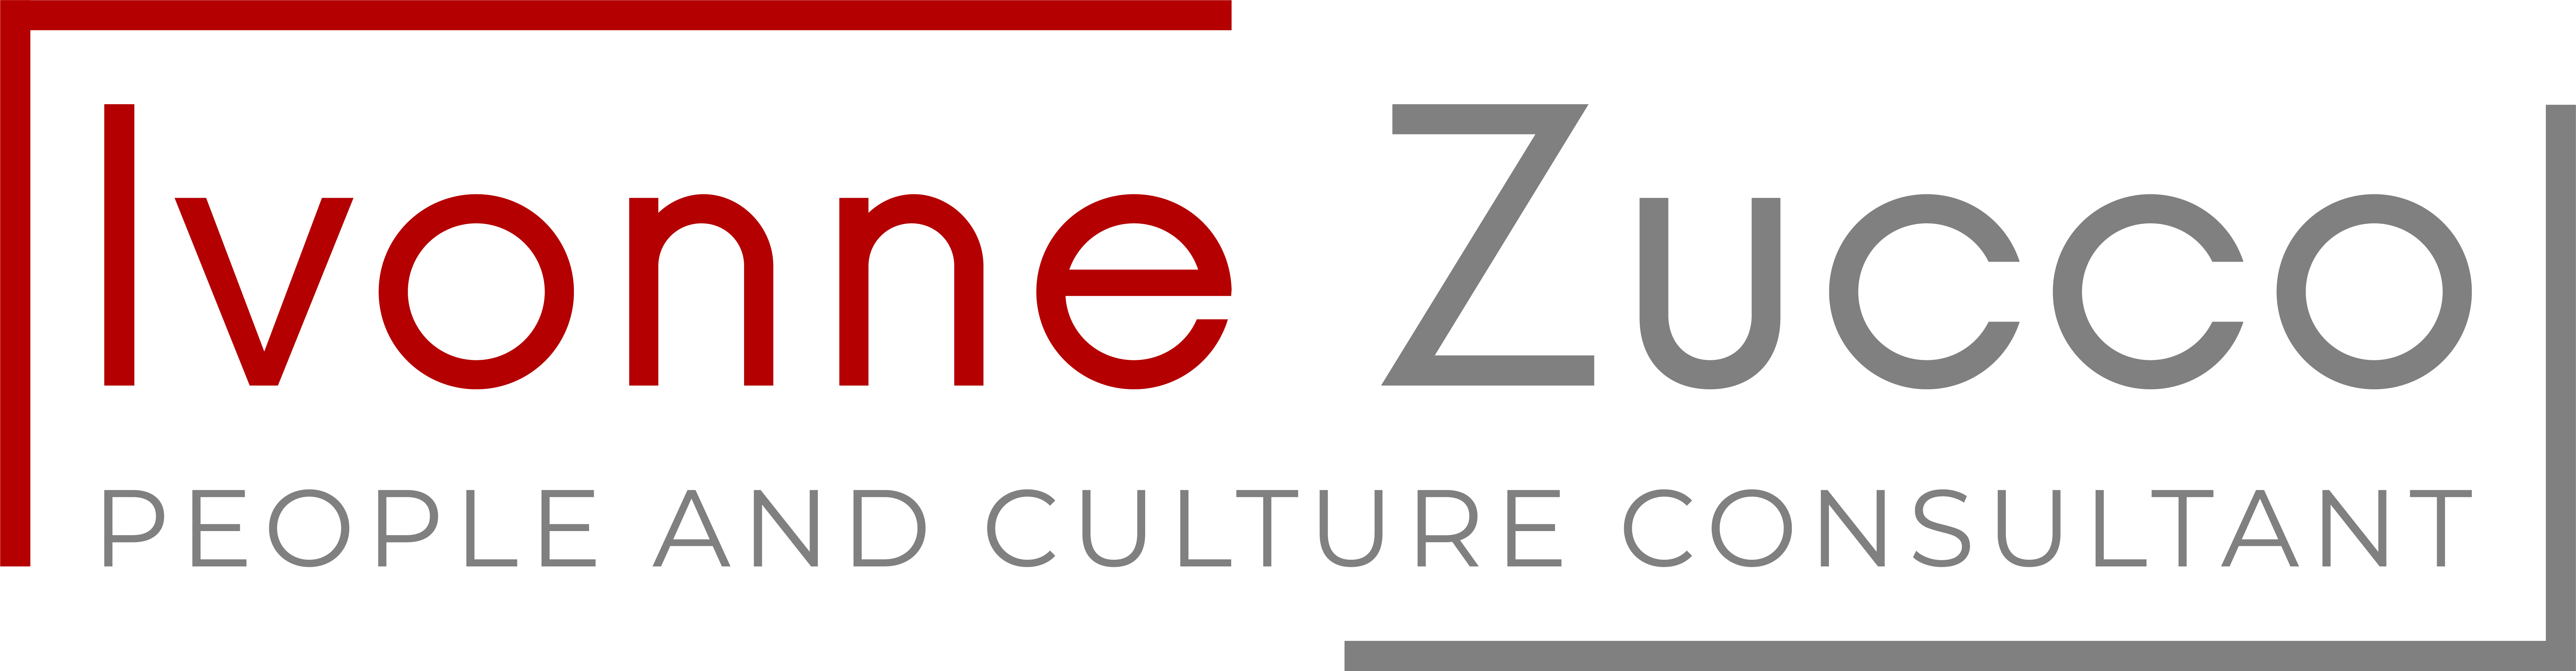 Ivonne Zucco, People and Culture Consultant